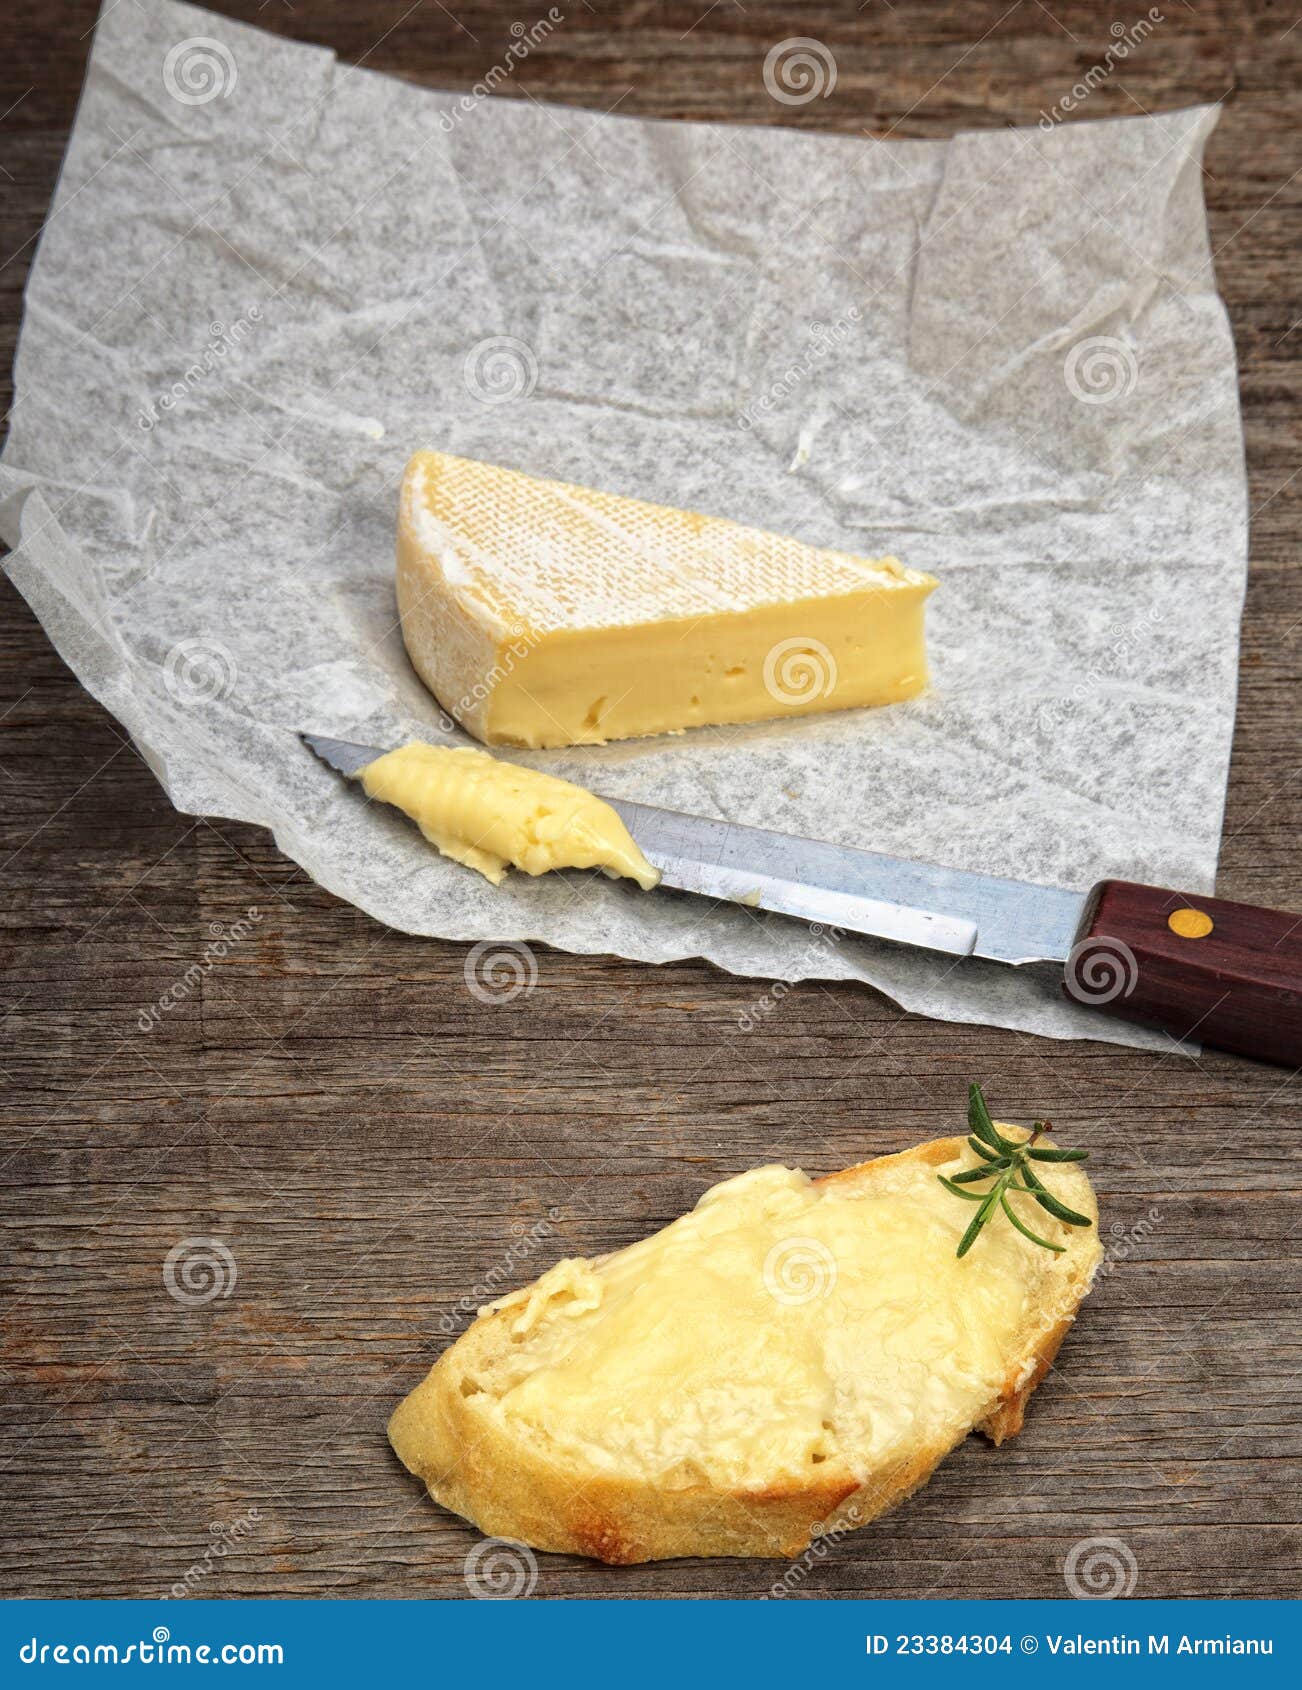 baguette and brie cheese